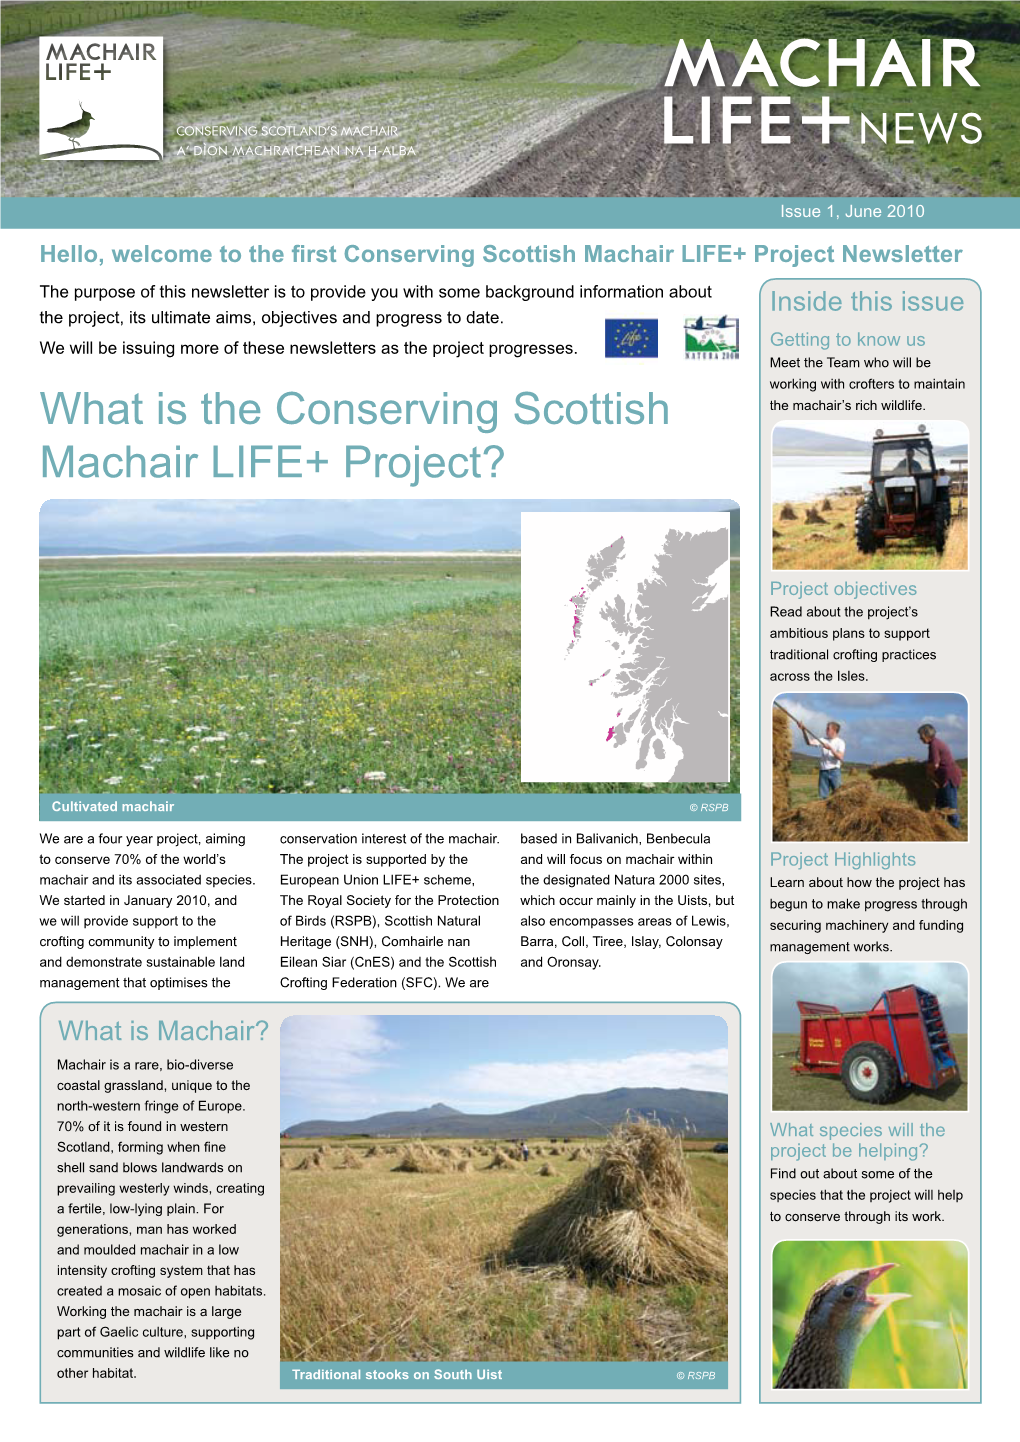 What Is the Conserving Scottish Machair LIFE+ Project?